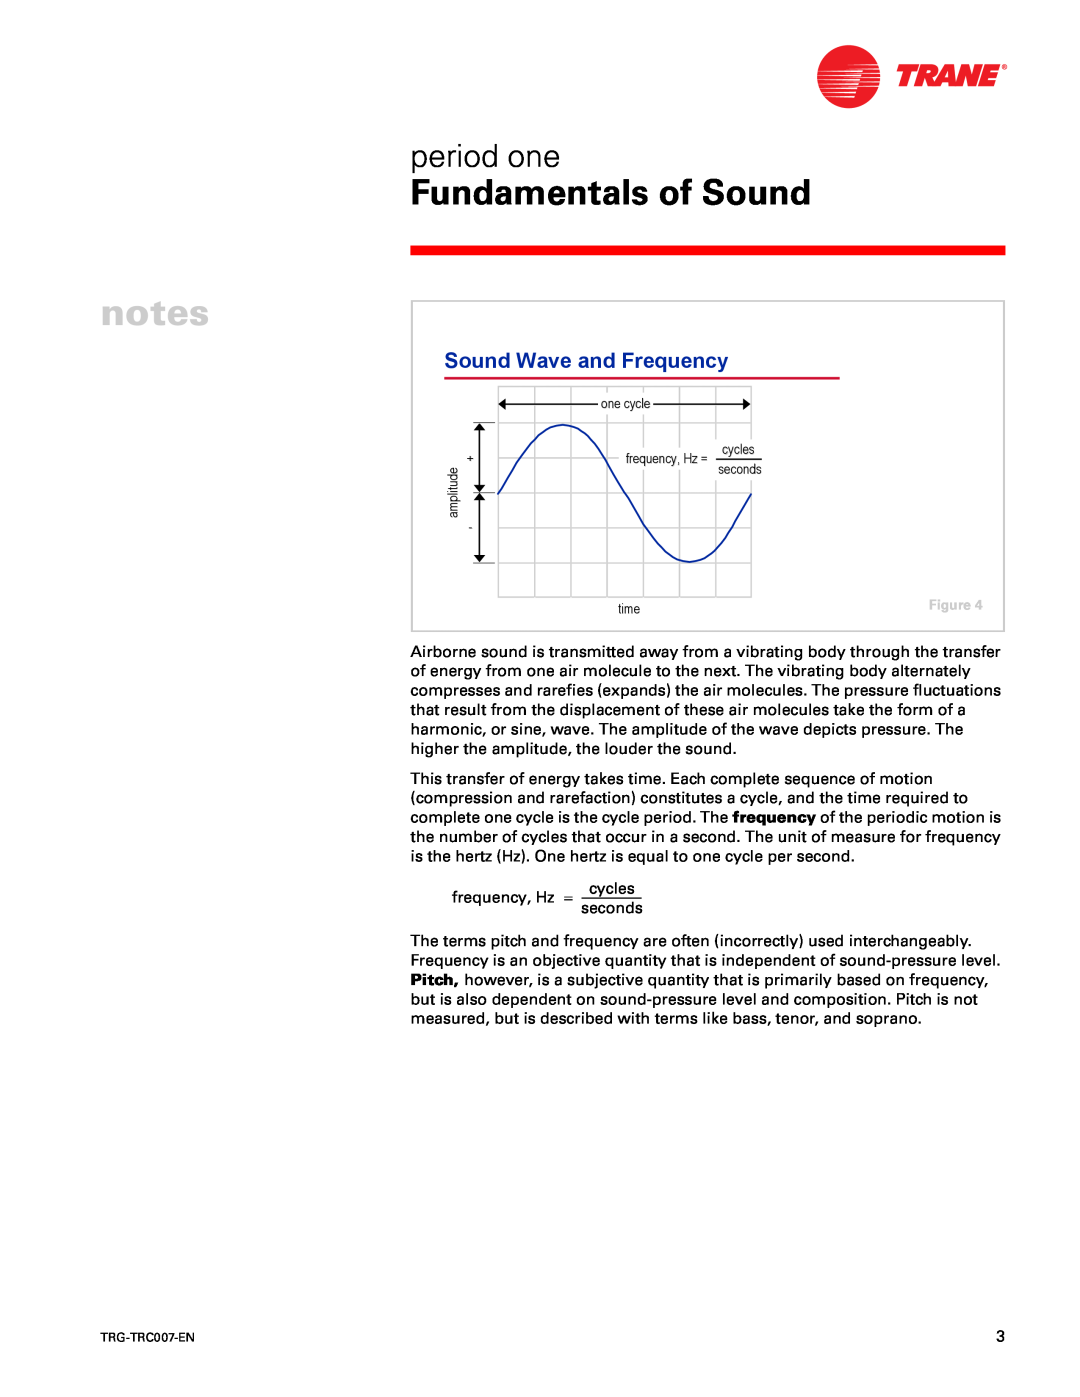 Trane TRG-TRC007-EN manual Sound Wave and Frequency, Fundamentals of Sound, period one 